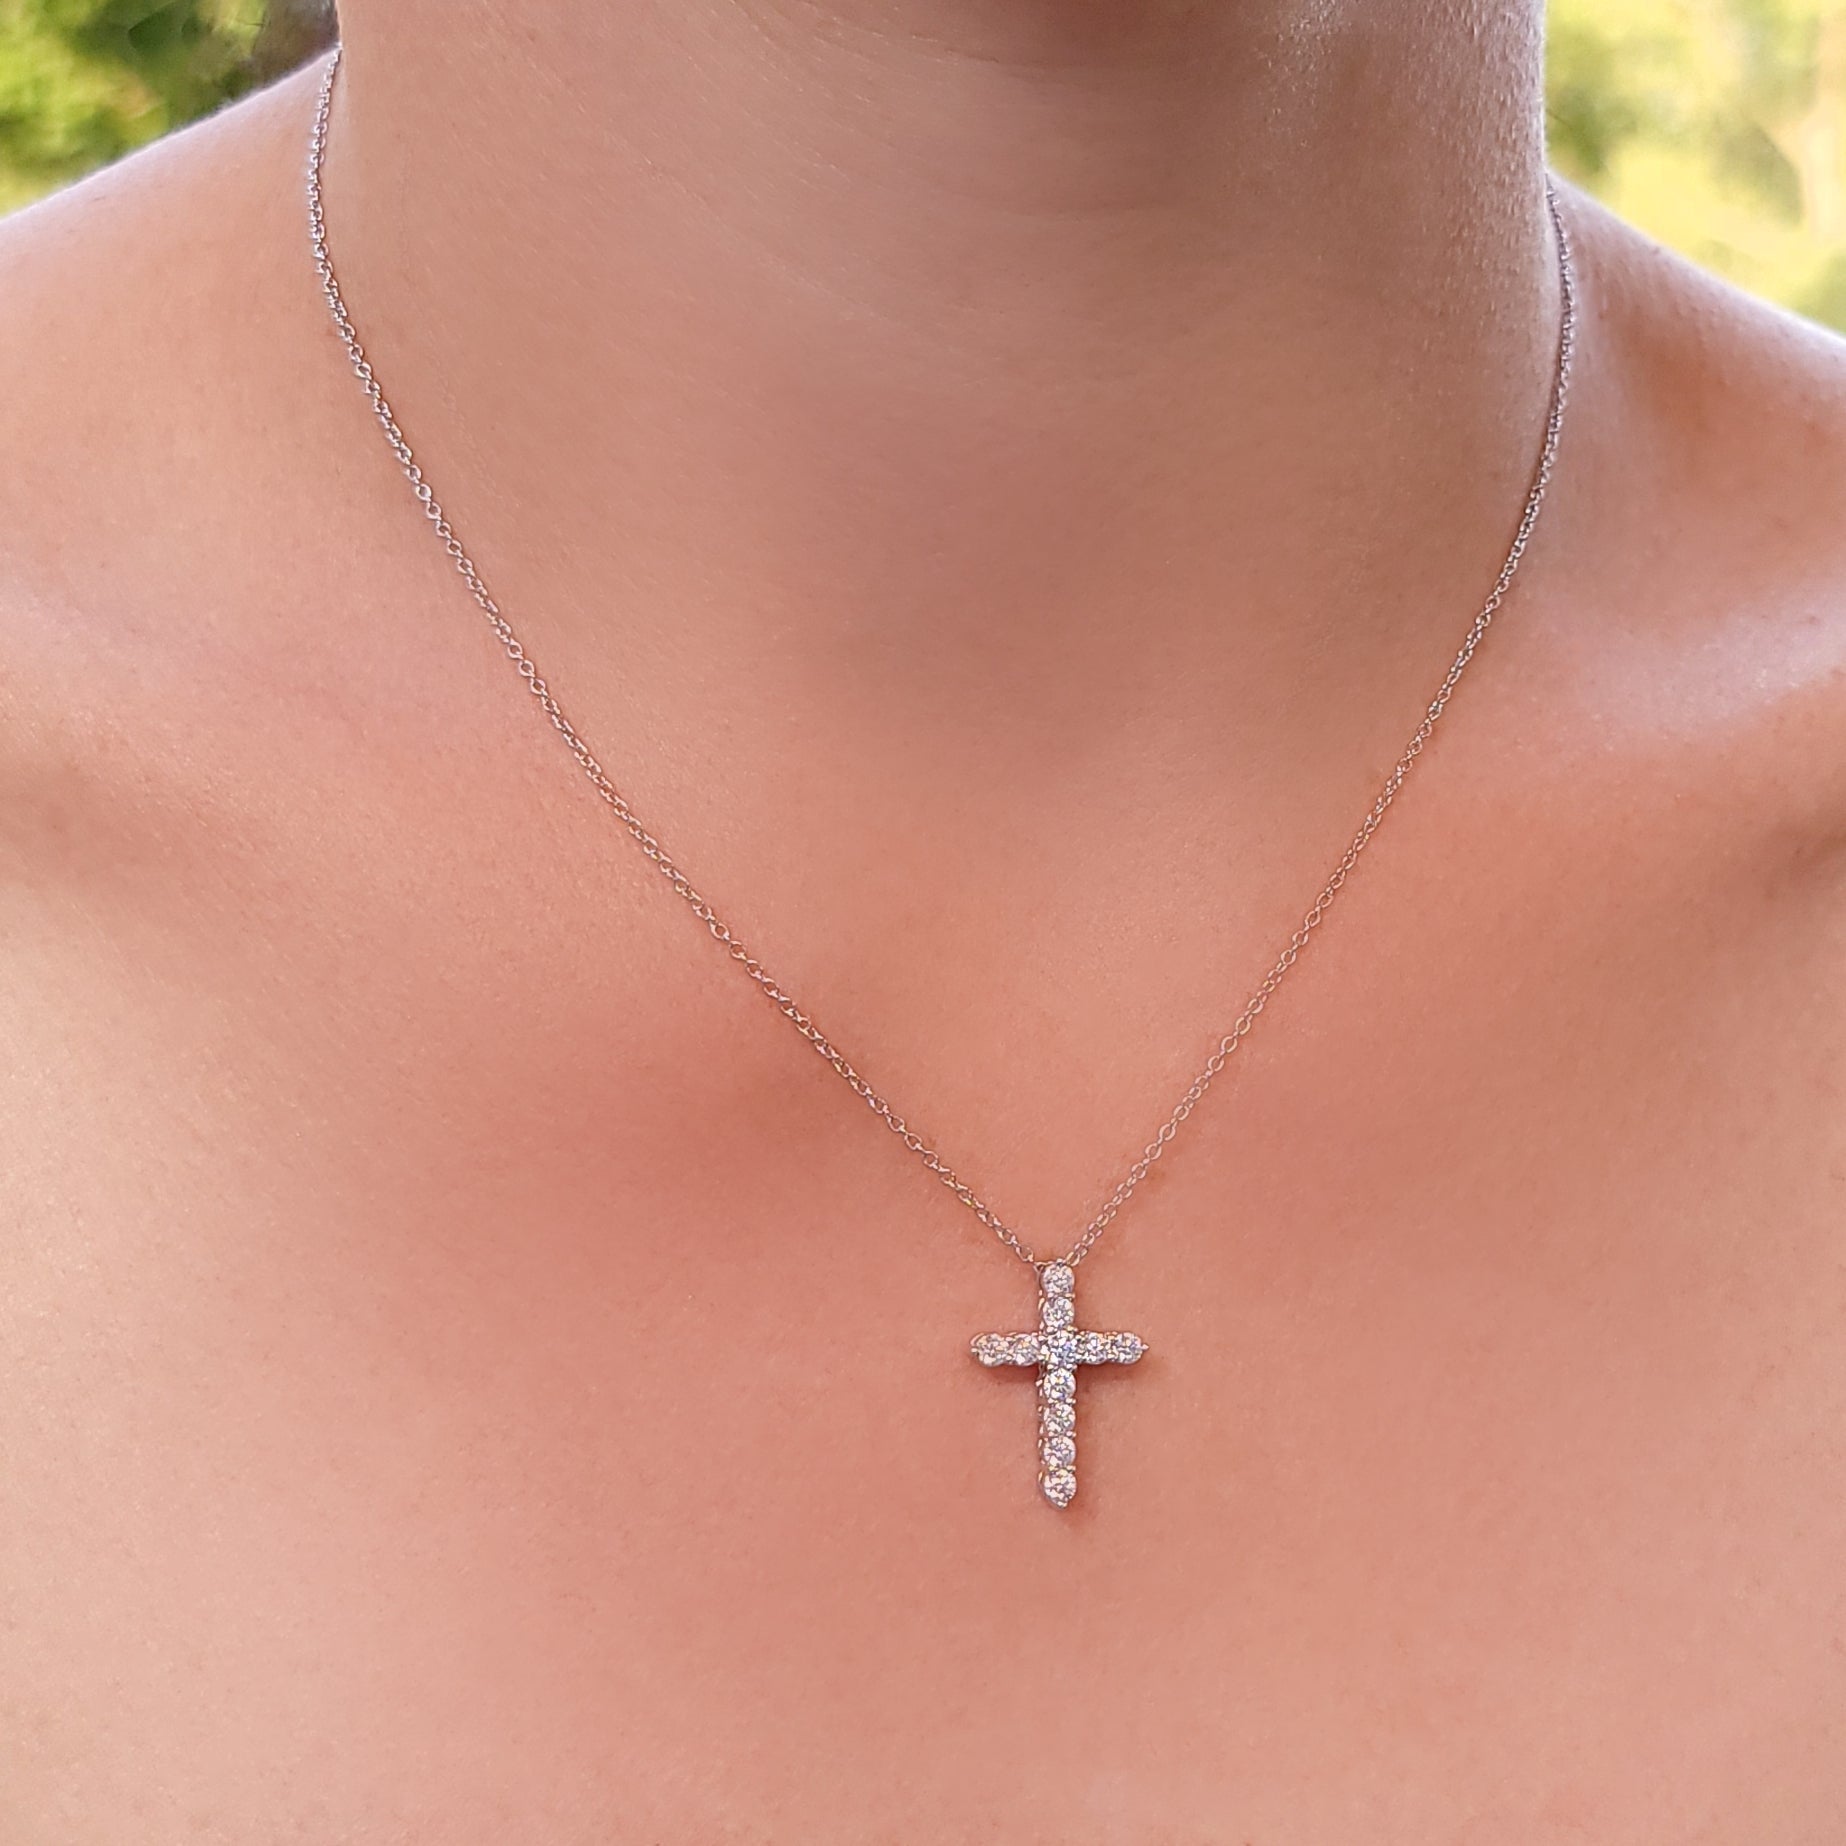 Cross Infinity Pendant Necklace Rose Flower Lucky 8 Crucifix Necklace  Christian Religious Floral Chain Jewelry for Women Girls (Rose Gold) -  BigaMart